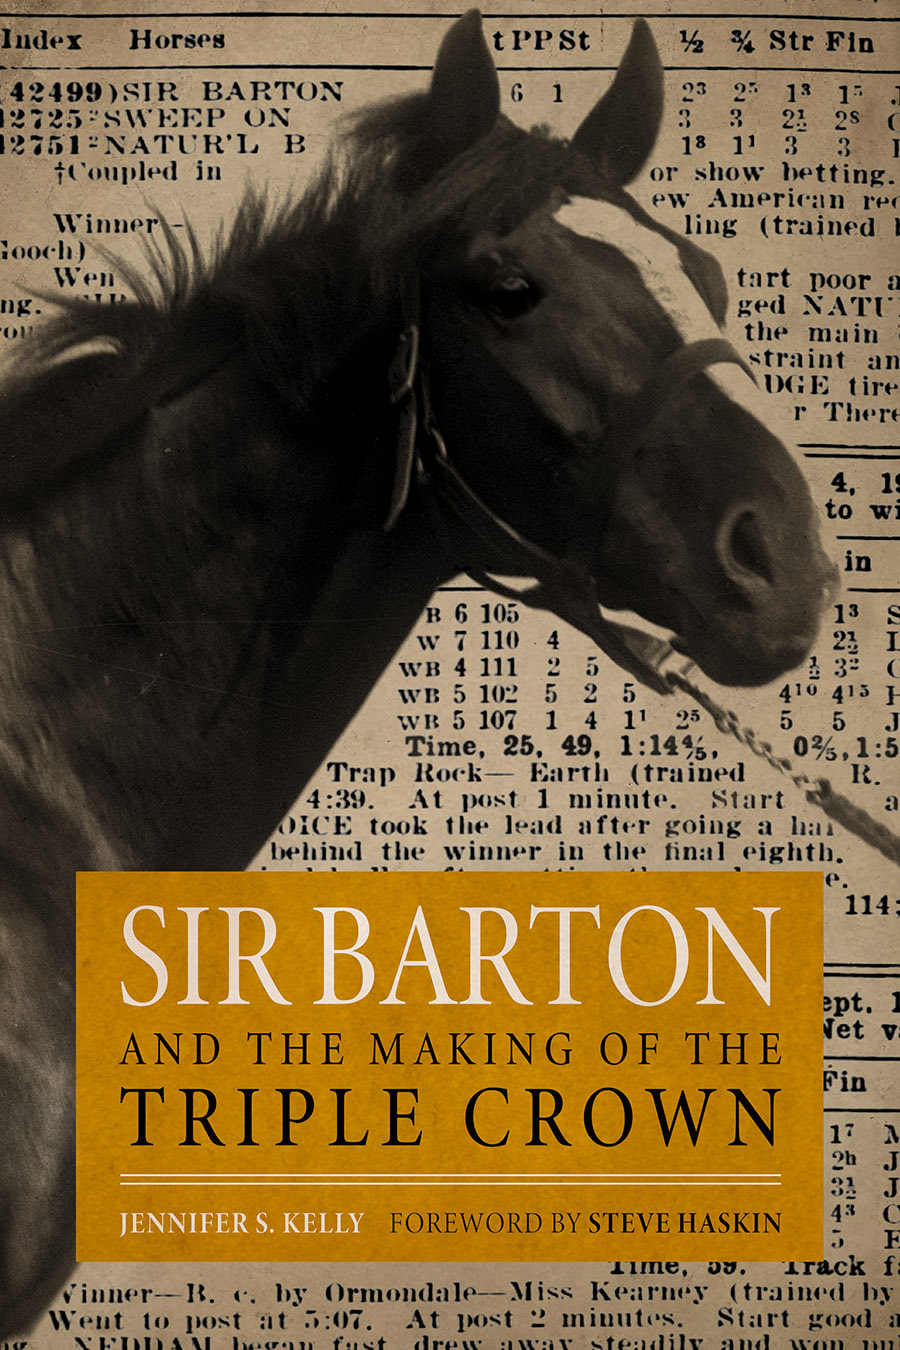 Sir Barton and the Making of the Triple Crown by Jennifer S. Kelly